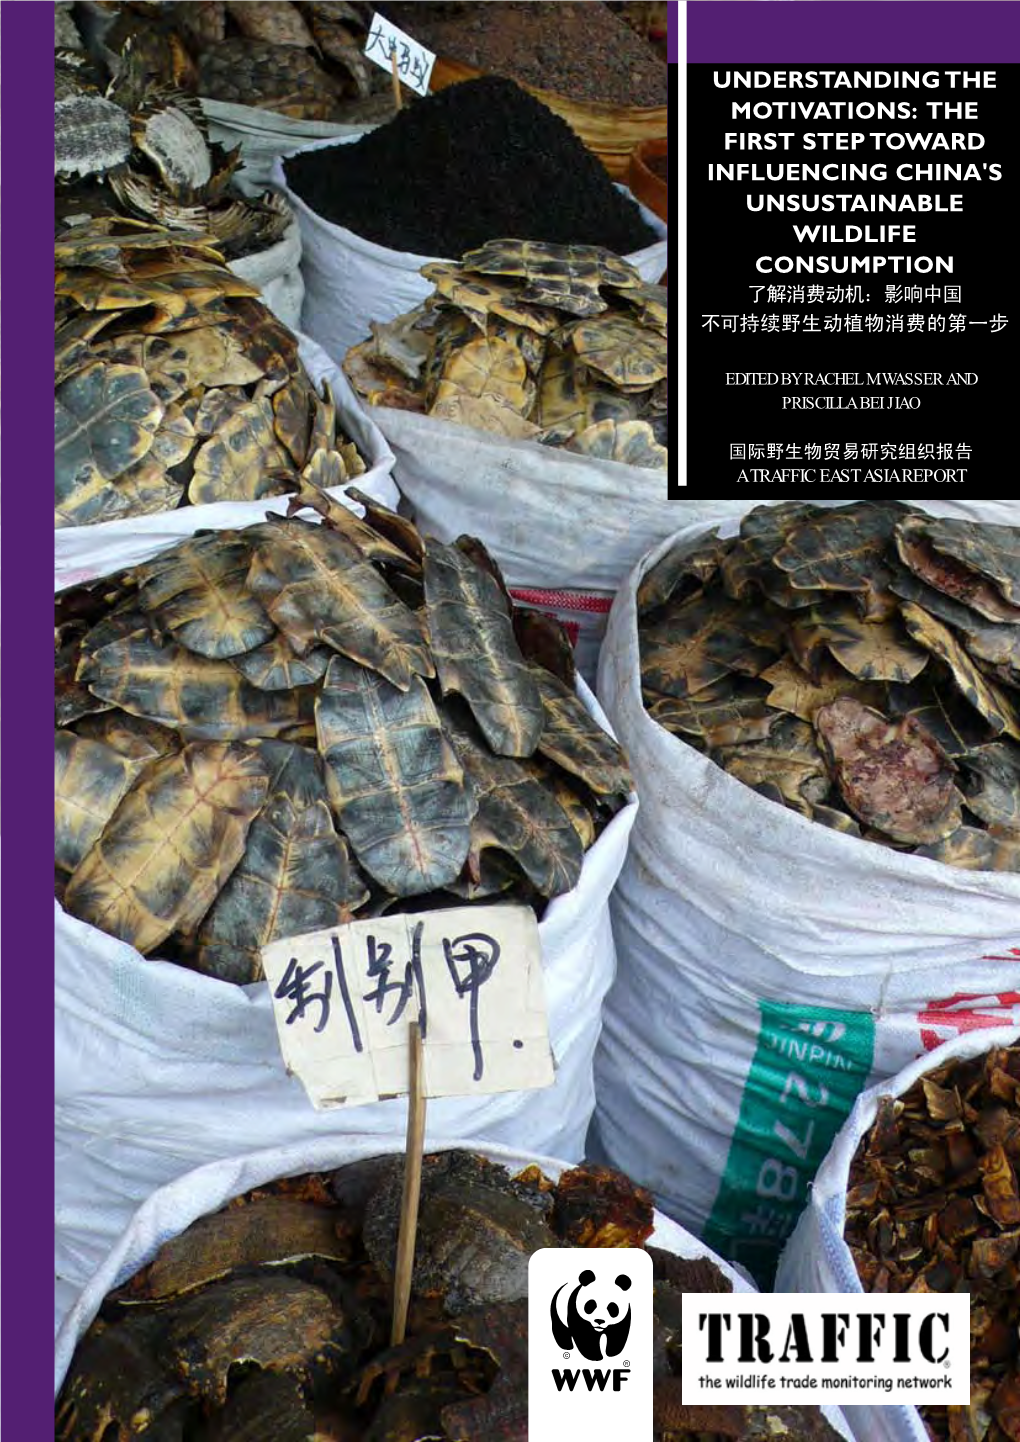 The First Step Toward Influencing China's Unsustainable Wildlife Consumption 了解消费动机：影响中国 不可持续野生动植物消费的第一步